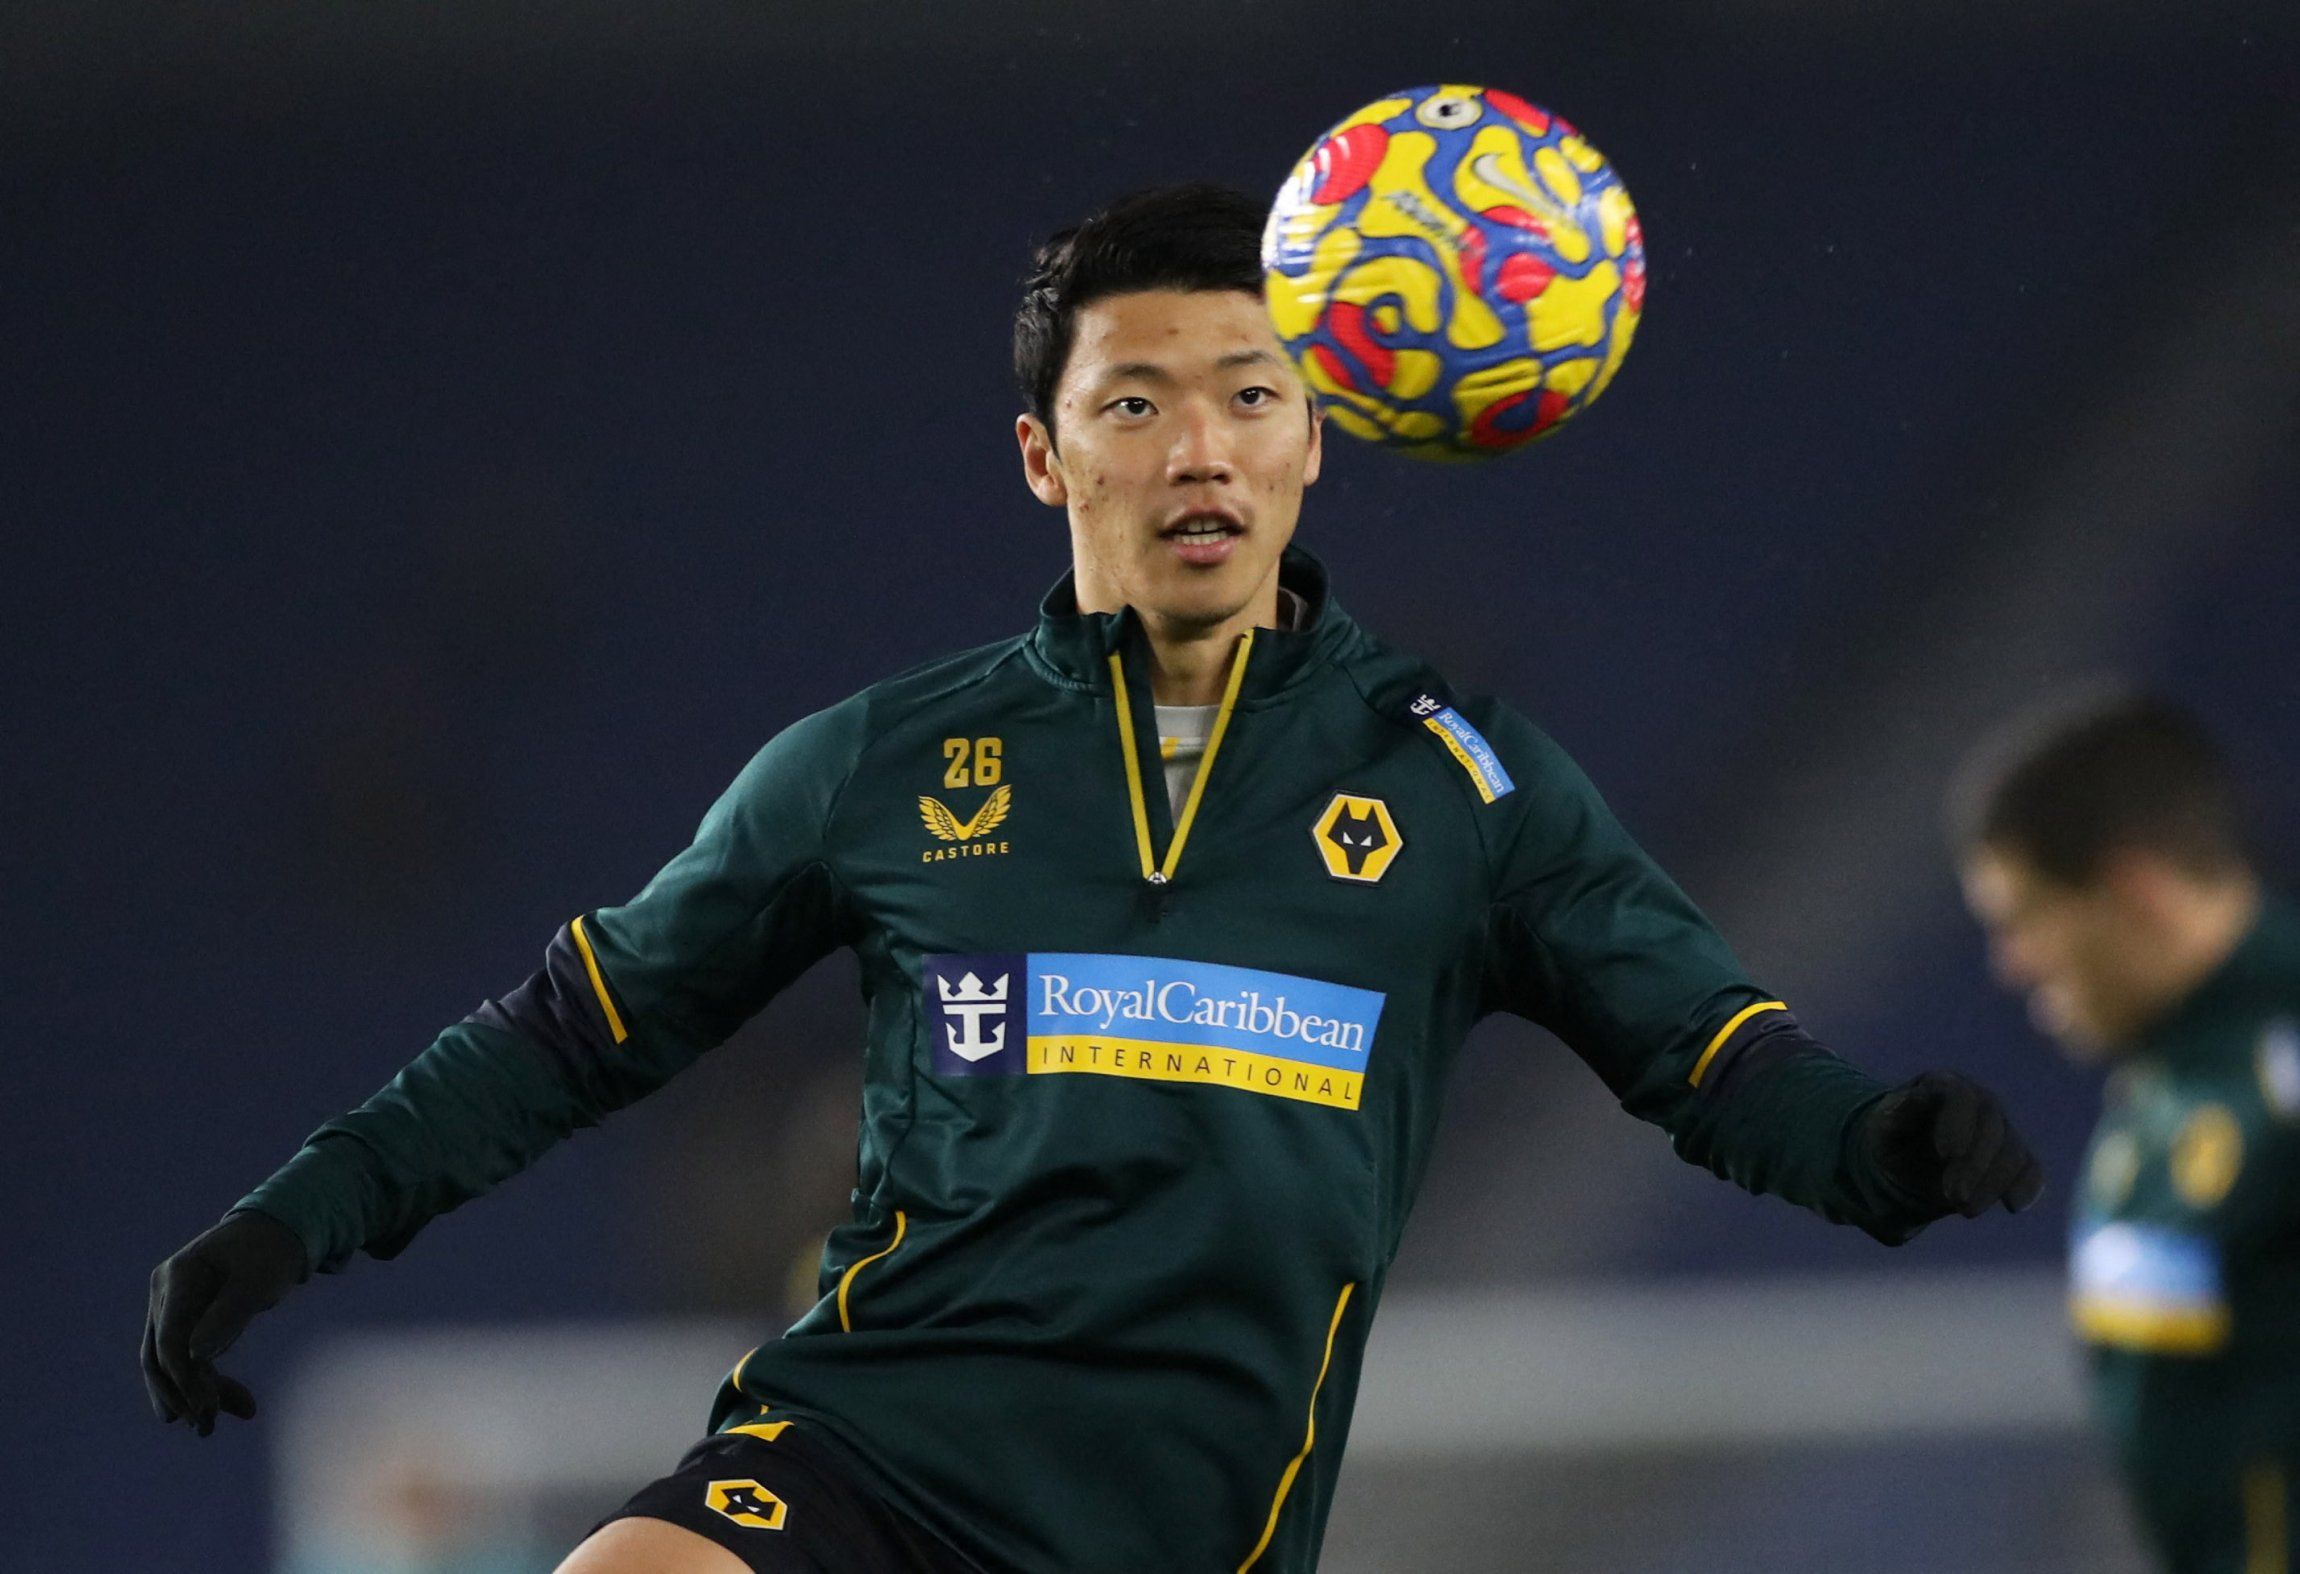 Bruno Lage, Fosun, Jeff Shi, Molineux, The Old Gold, Wolves, Wolves fans, Wolves info, Wolves latest, Wolves news, Wolves updates, WWFC, WWFC news, WWFC update, Premier League, Premier League news, Wolverhampton Wanderers, Wolves transfer news, January transfer window, Hwang Hee-chan, RB Leipzig, 
